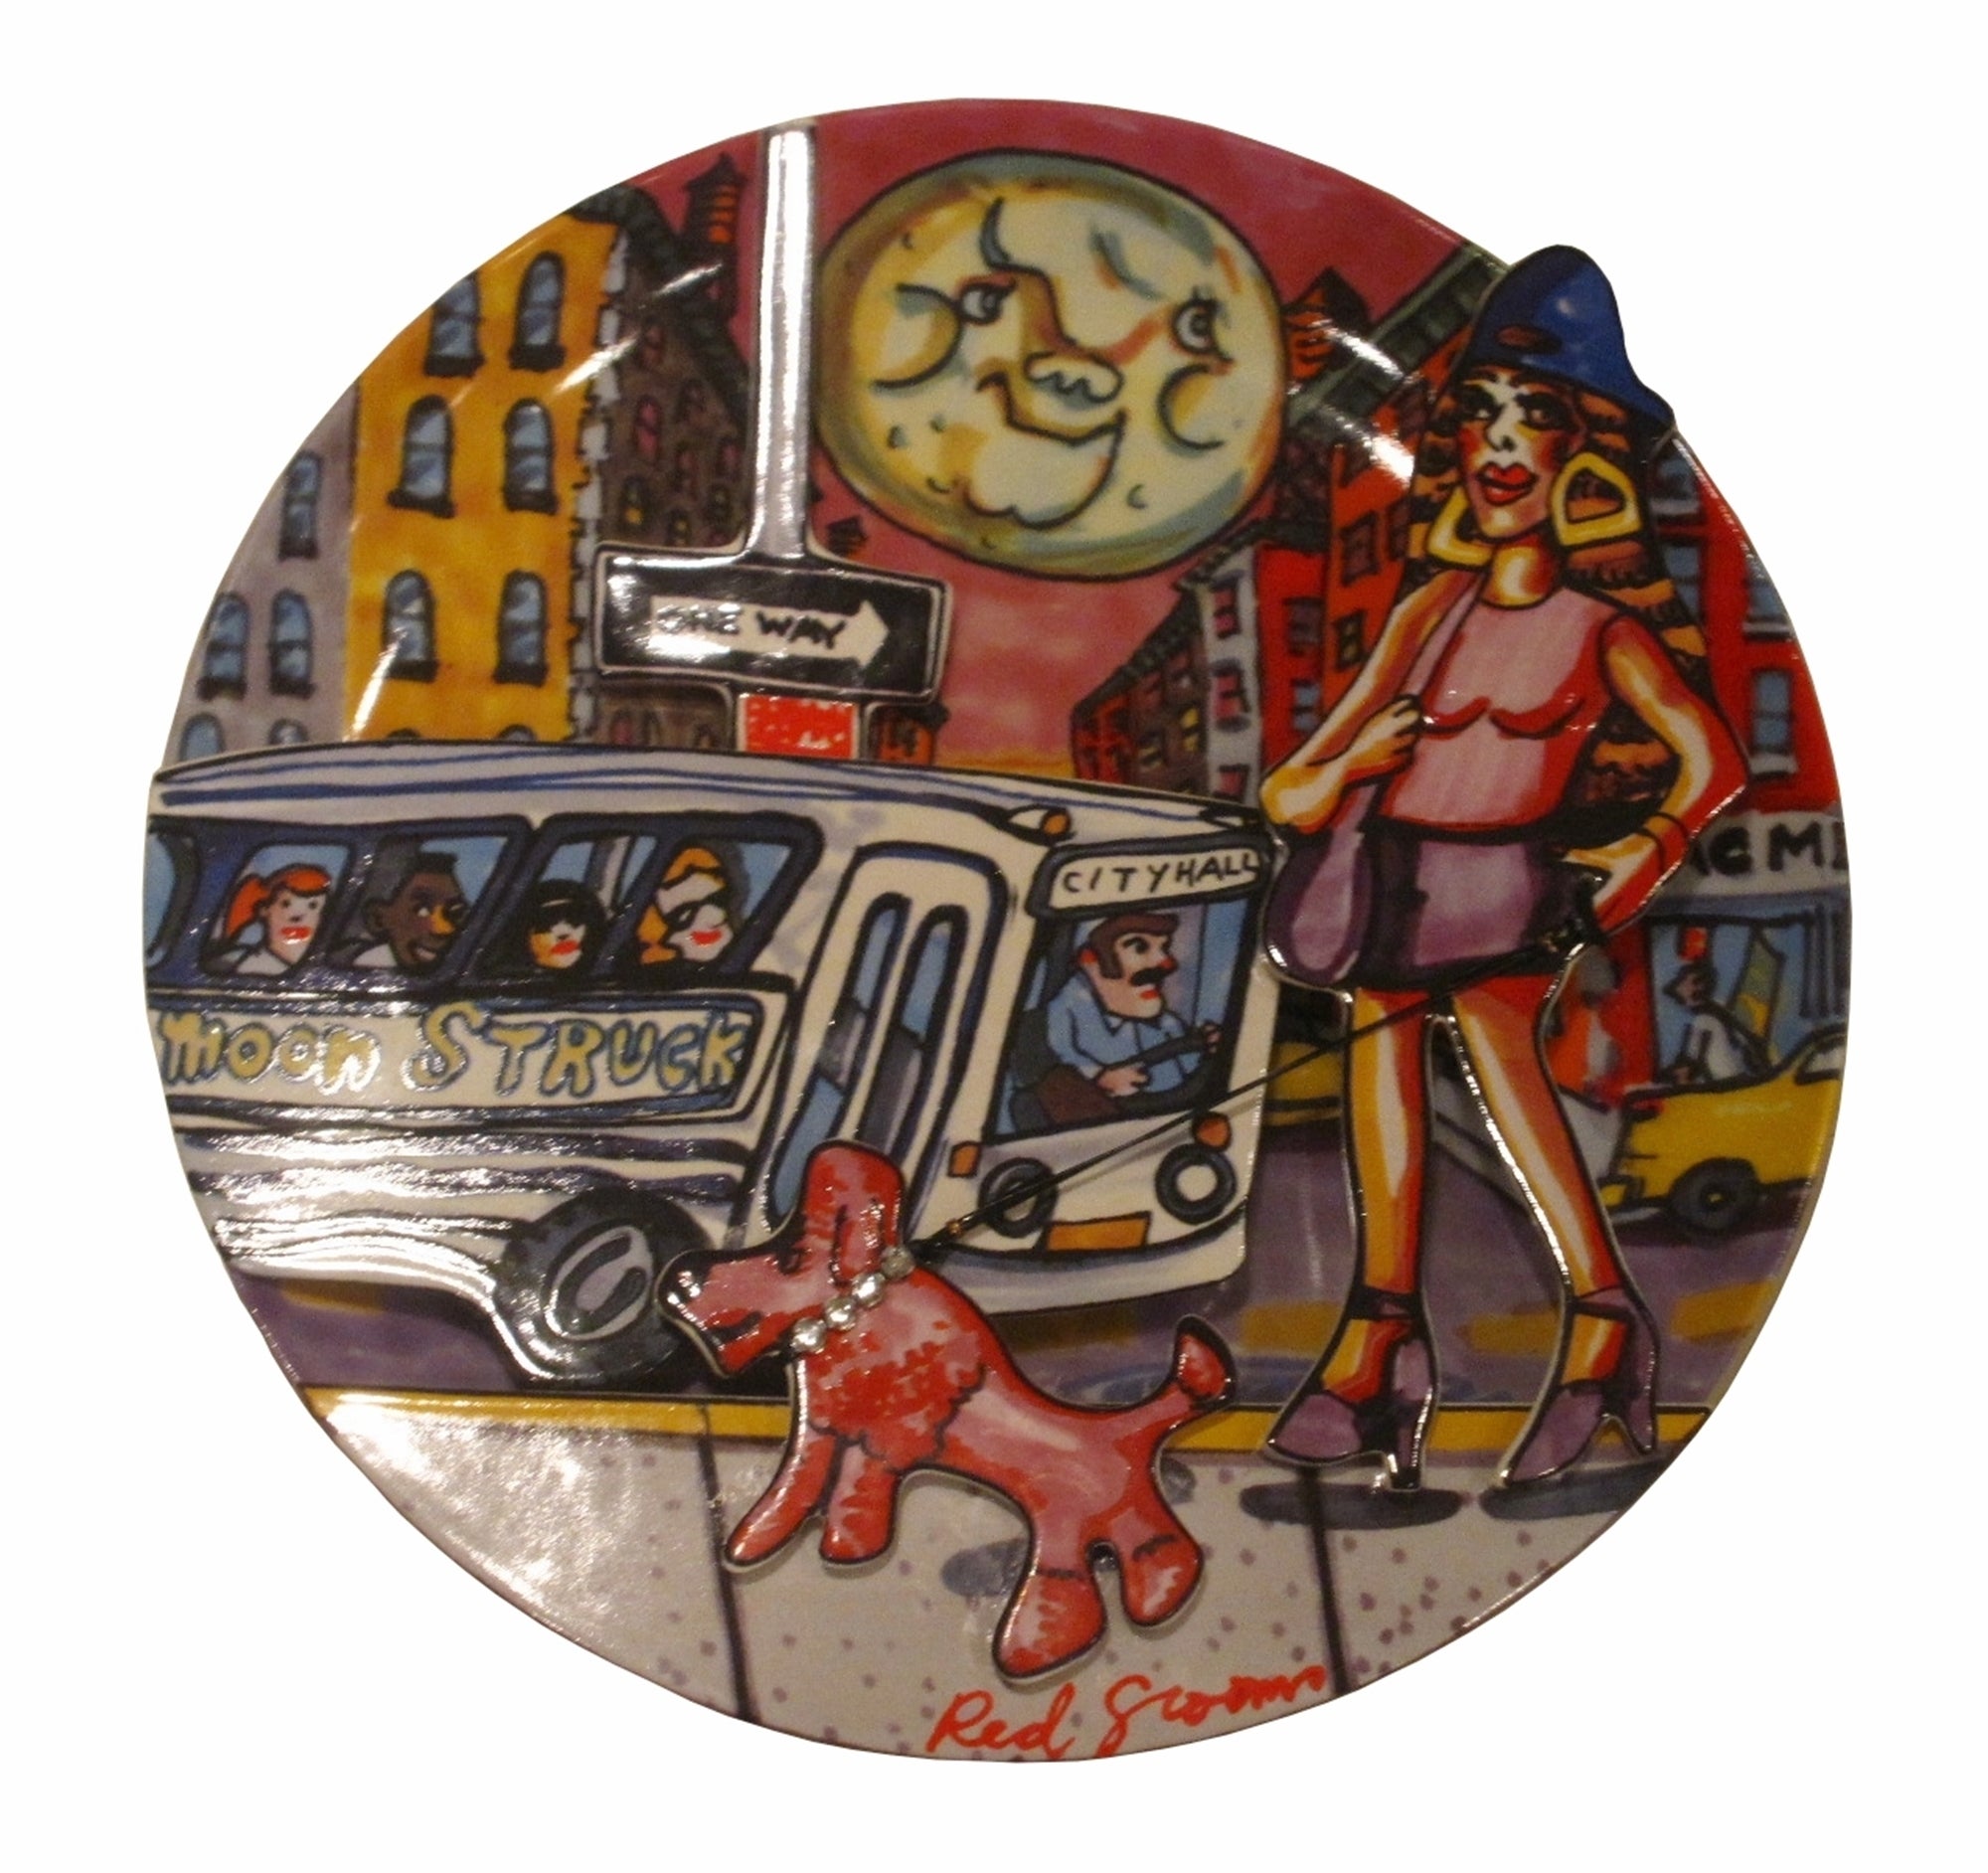 Red Grooms "Moonstruck" Limited Edition Plate